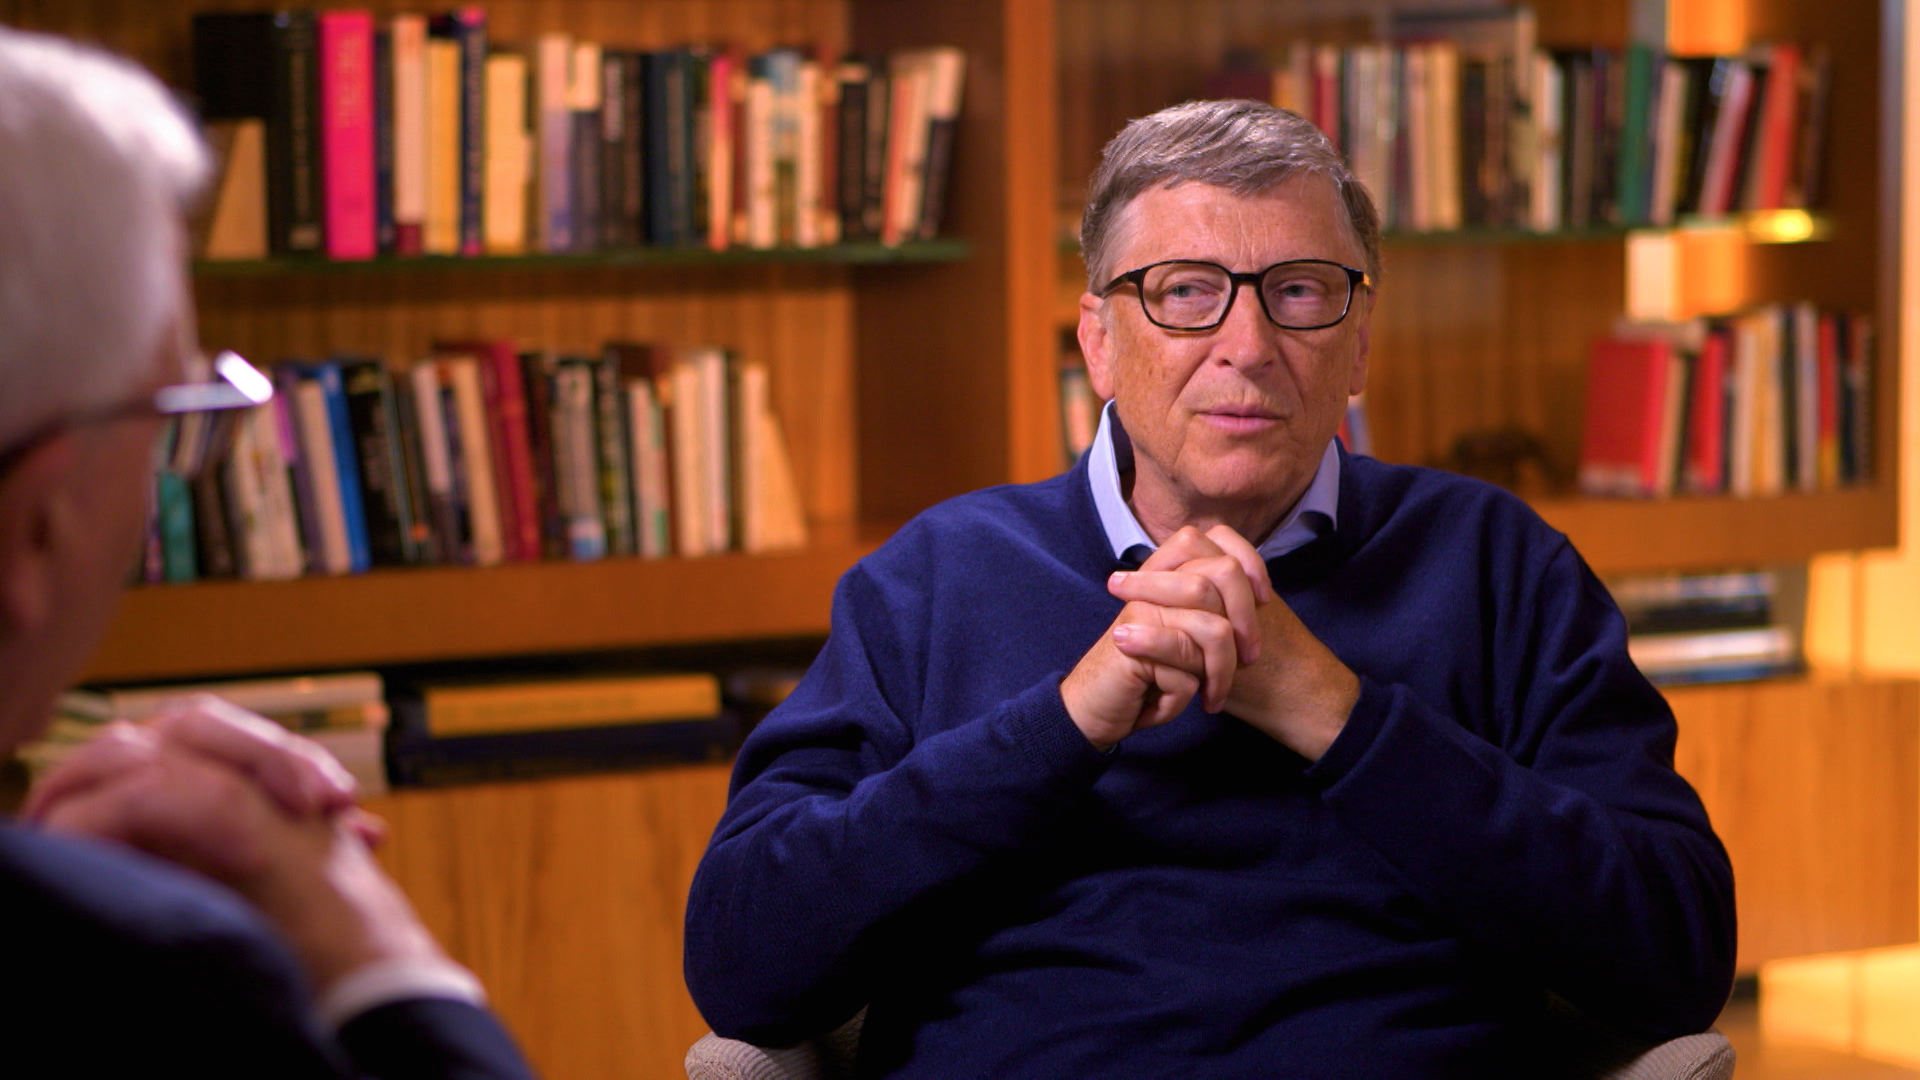 Bill Gates Switches To Android Phone - HD Wallpaper 